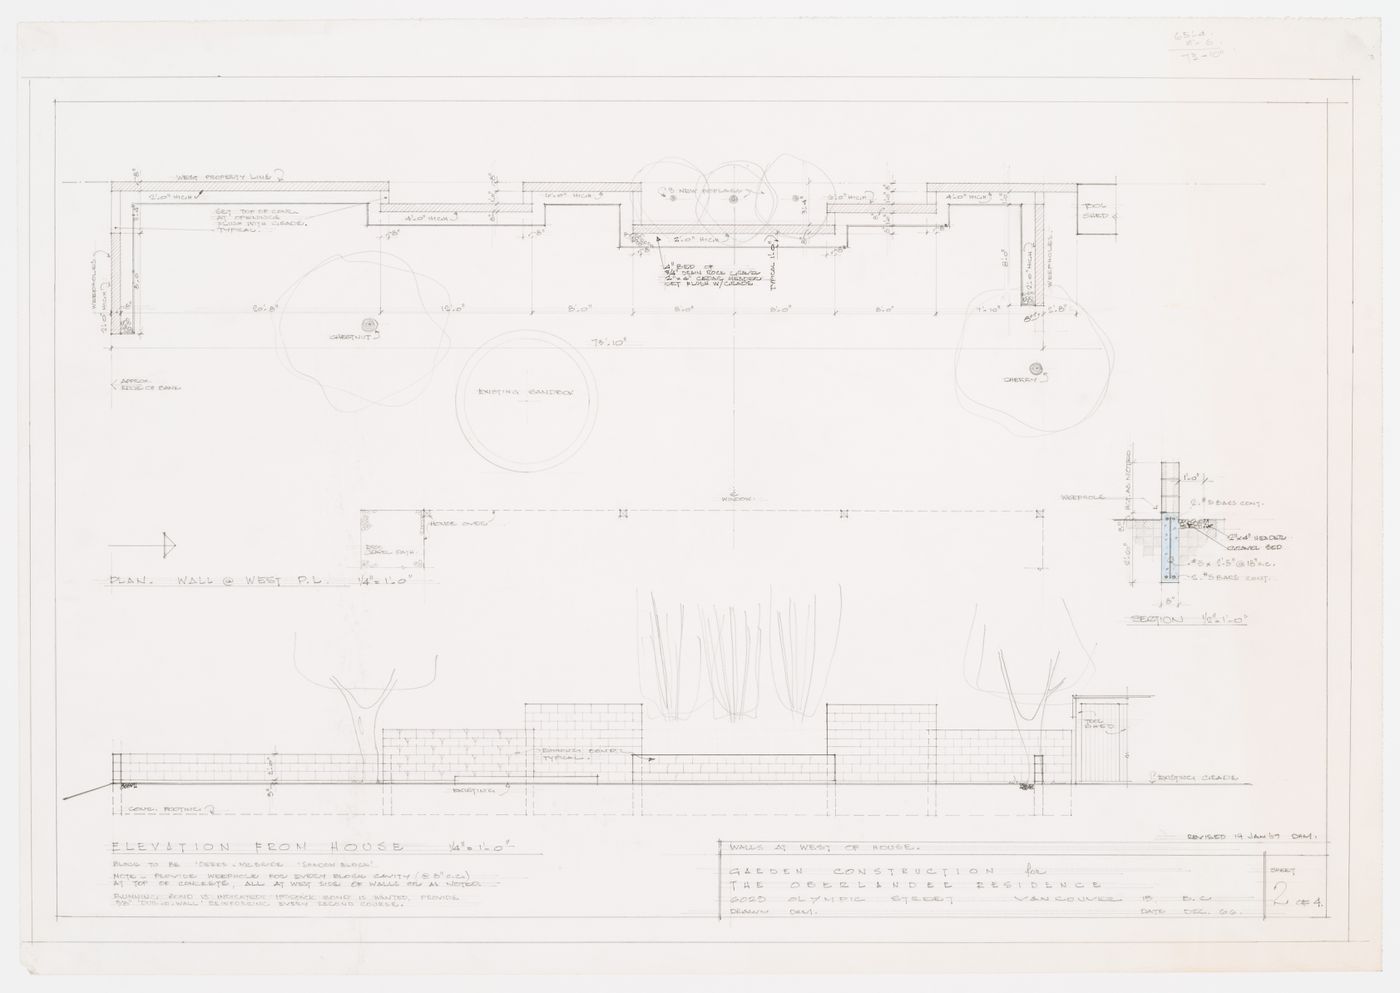 Garden construction for the Oberlander Residence: plan and elevation of the walls at the west of the house